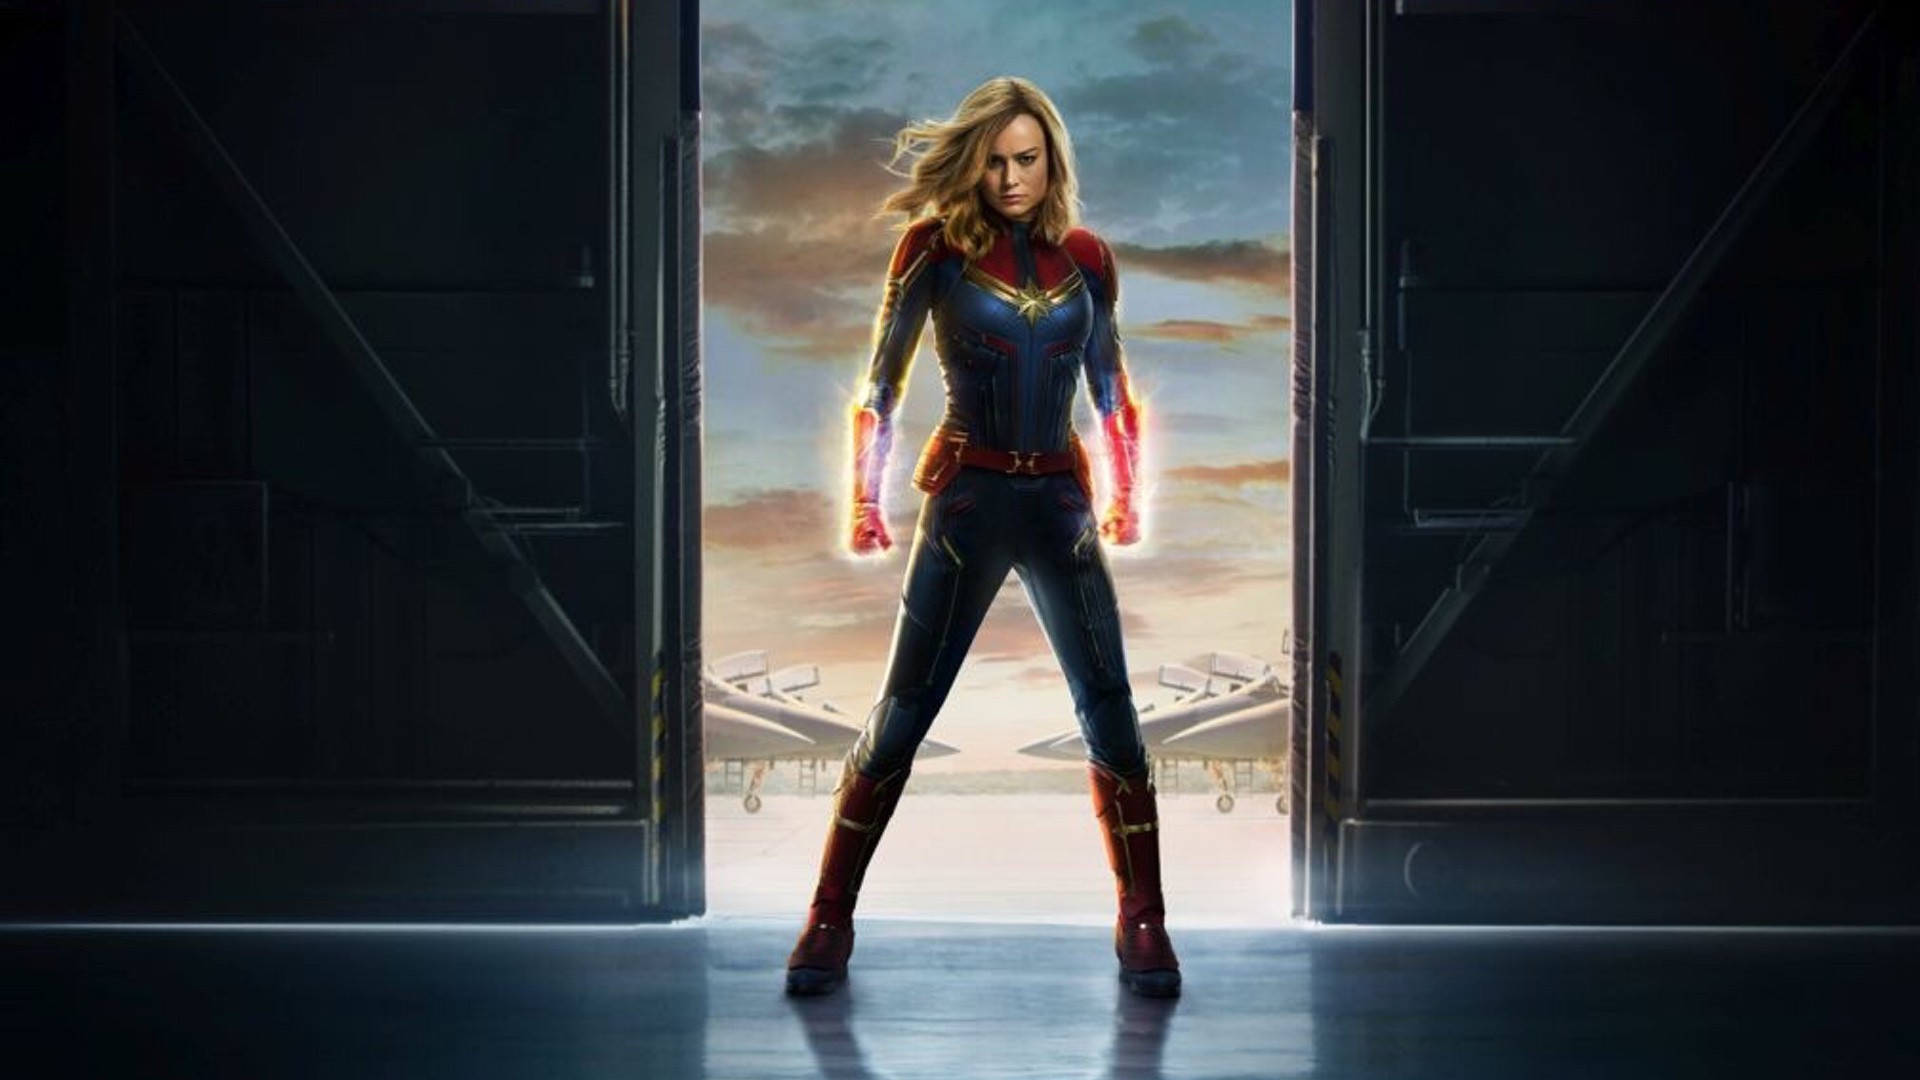 Captain Marvel Wallpaper HD With high-resolution 1920X1080 pixel. You can use this poster wallpaper for your Desktop Computers, Mac Screensavers, Windows Backgrounds, iPhone Wallpapers, Tablet or Android Lock screen and another Mobile device